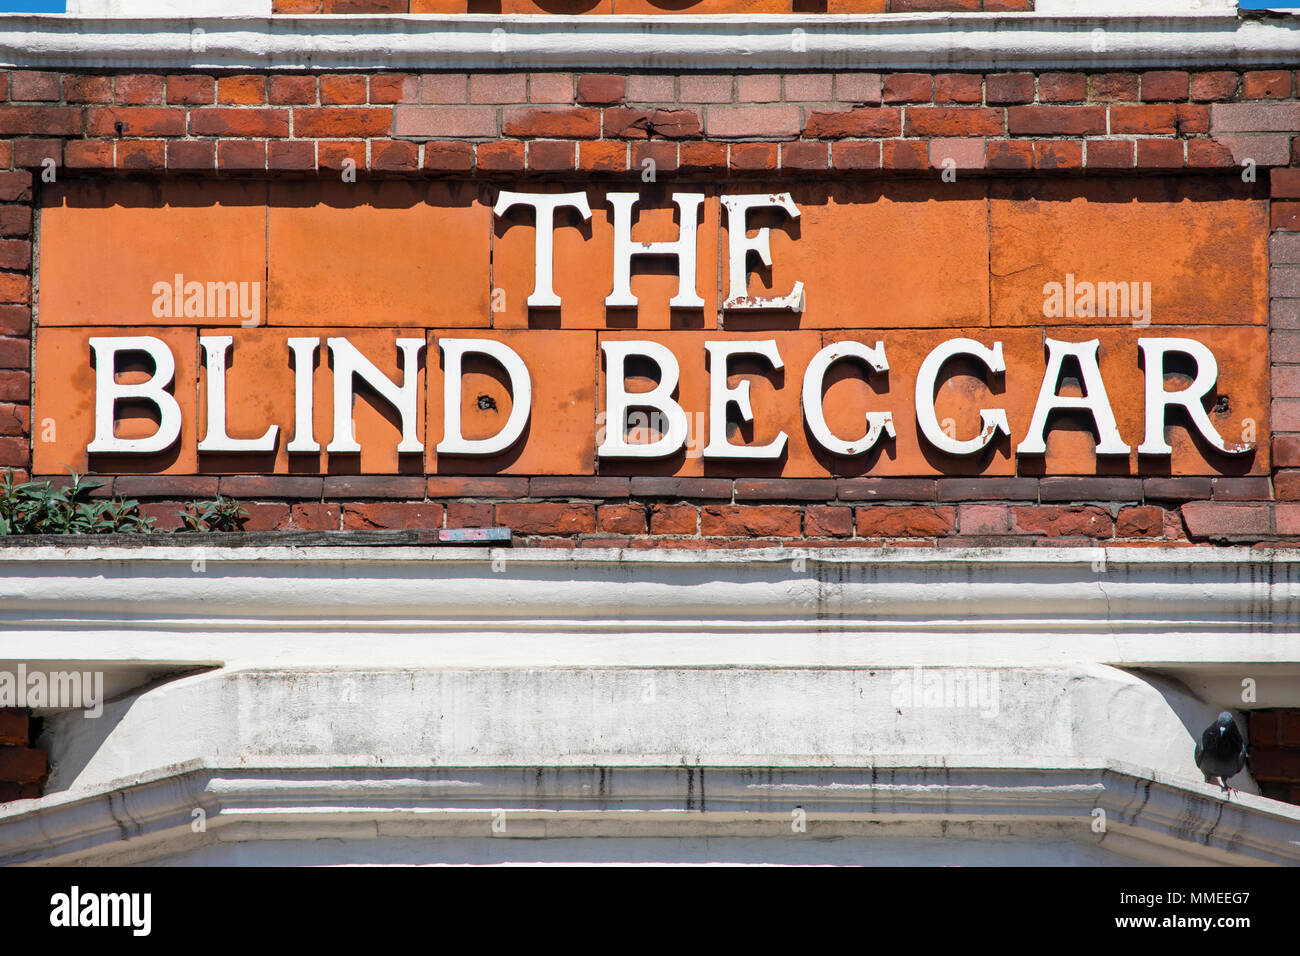 LONDON, UK - APRIL 19TH 2018: The original lettering on the exterior of The Blind Beggar public house on Whitechapel Road in London, on 18th April 201 Stock Photo